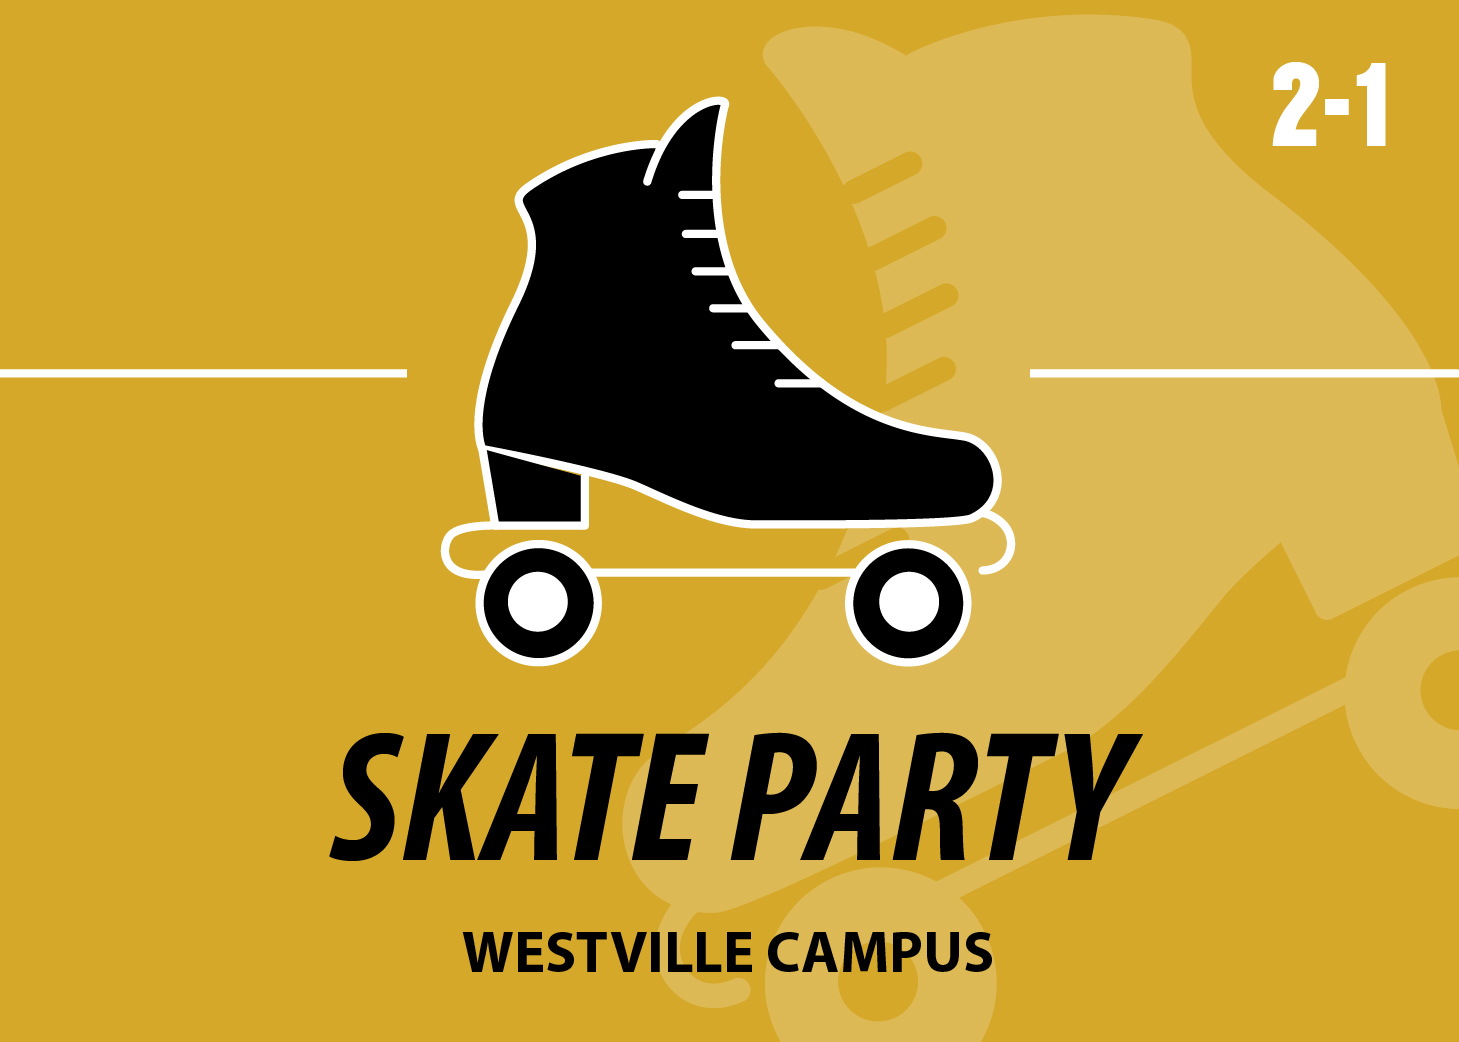 Graphic: A black roller skate on a gold background. Text says "Skate Party Westville Campus"